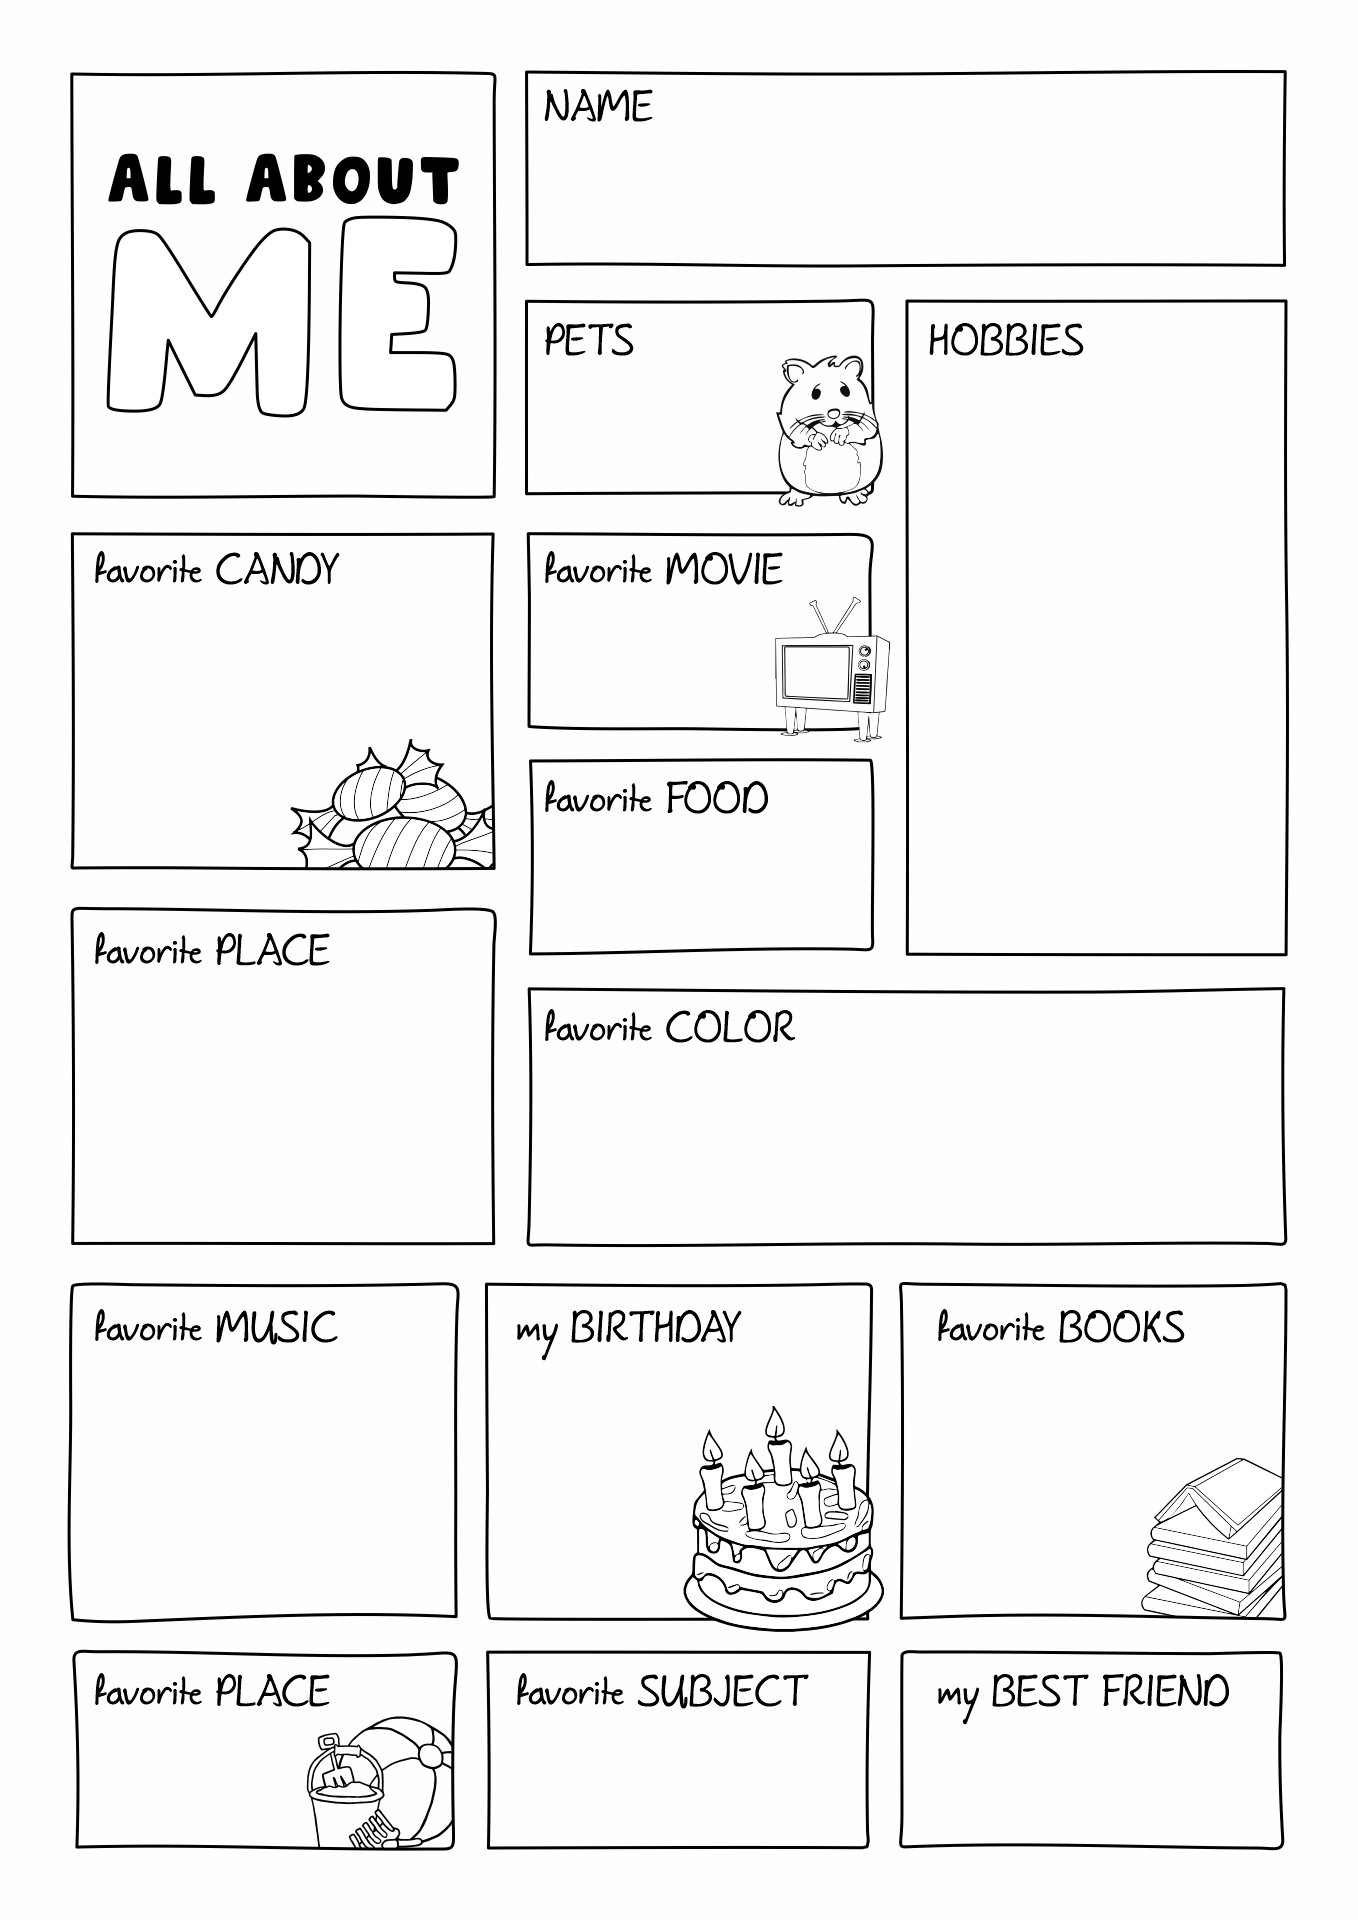 All About Me Template Worksheet Image